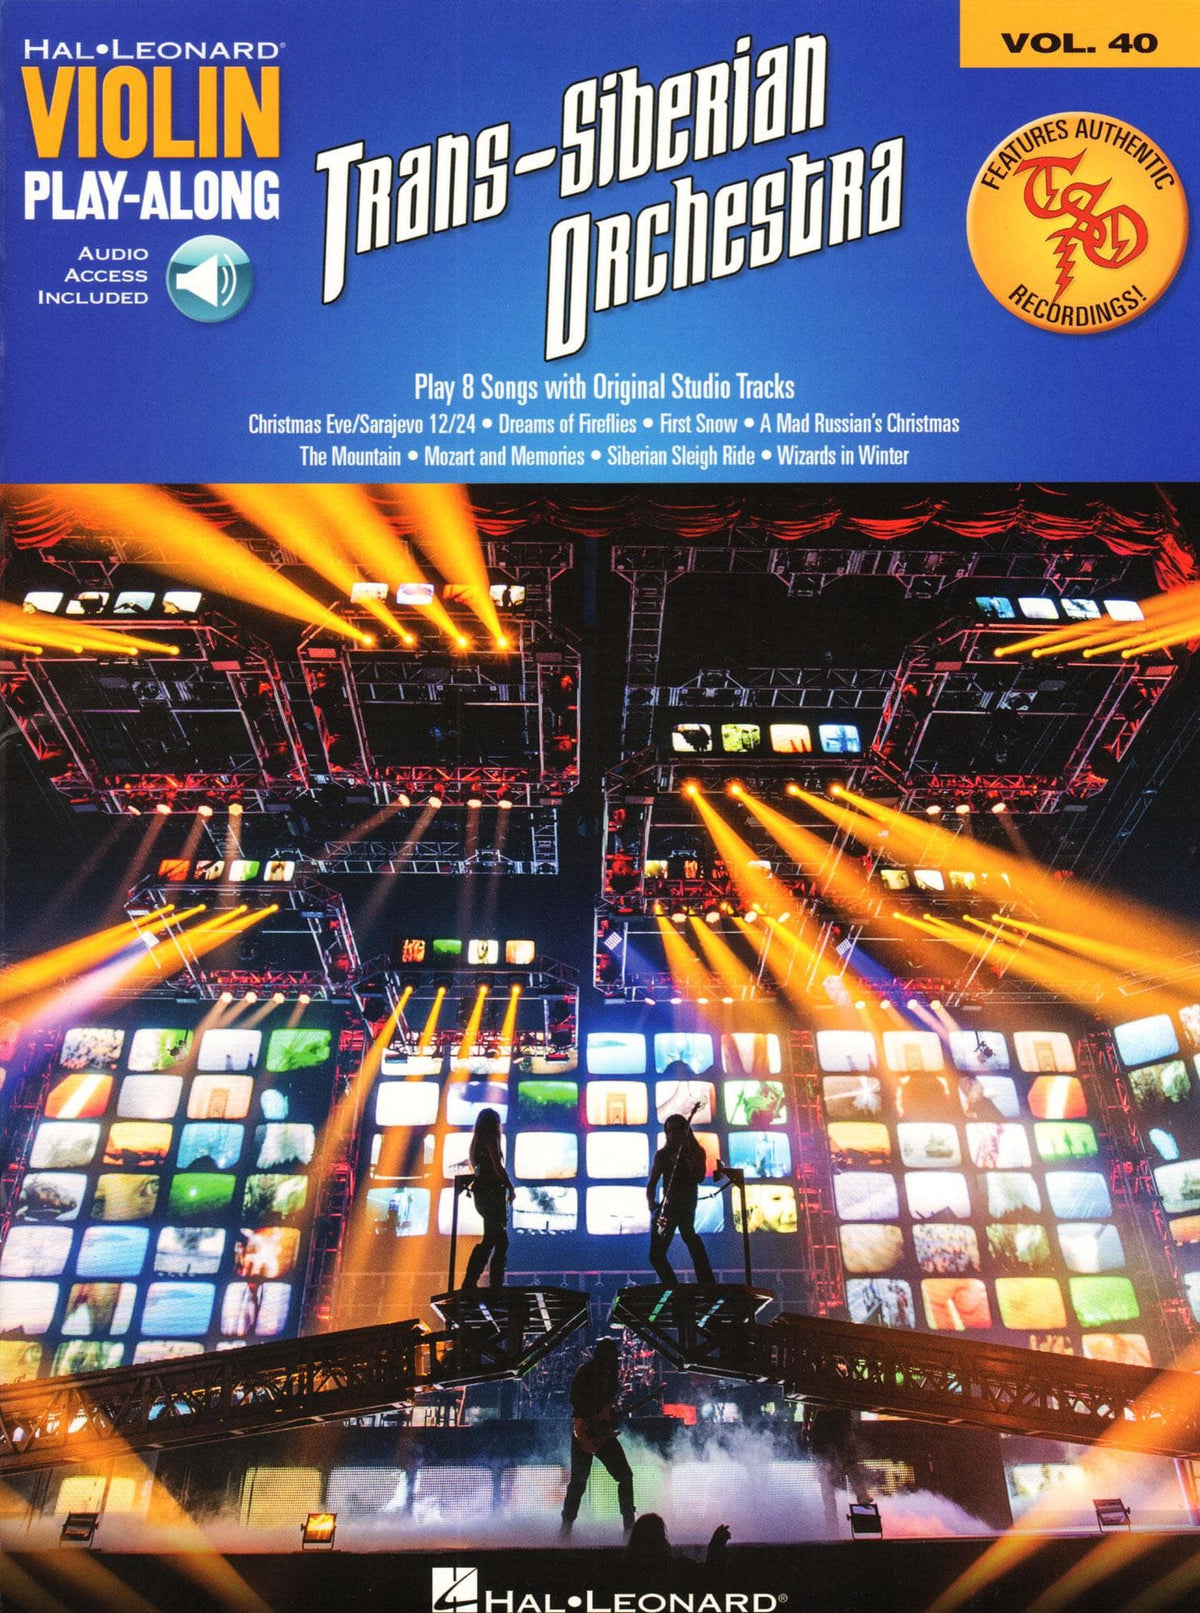 Trans-Siberian Orchestra - Violin Play-Along Vol. 40 - 8 Songs - for Violin with Online Audio Accompaniment - Hal Leonard